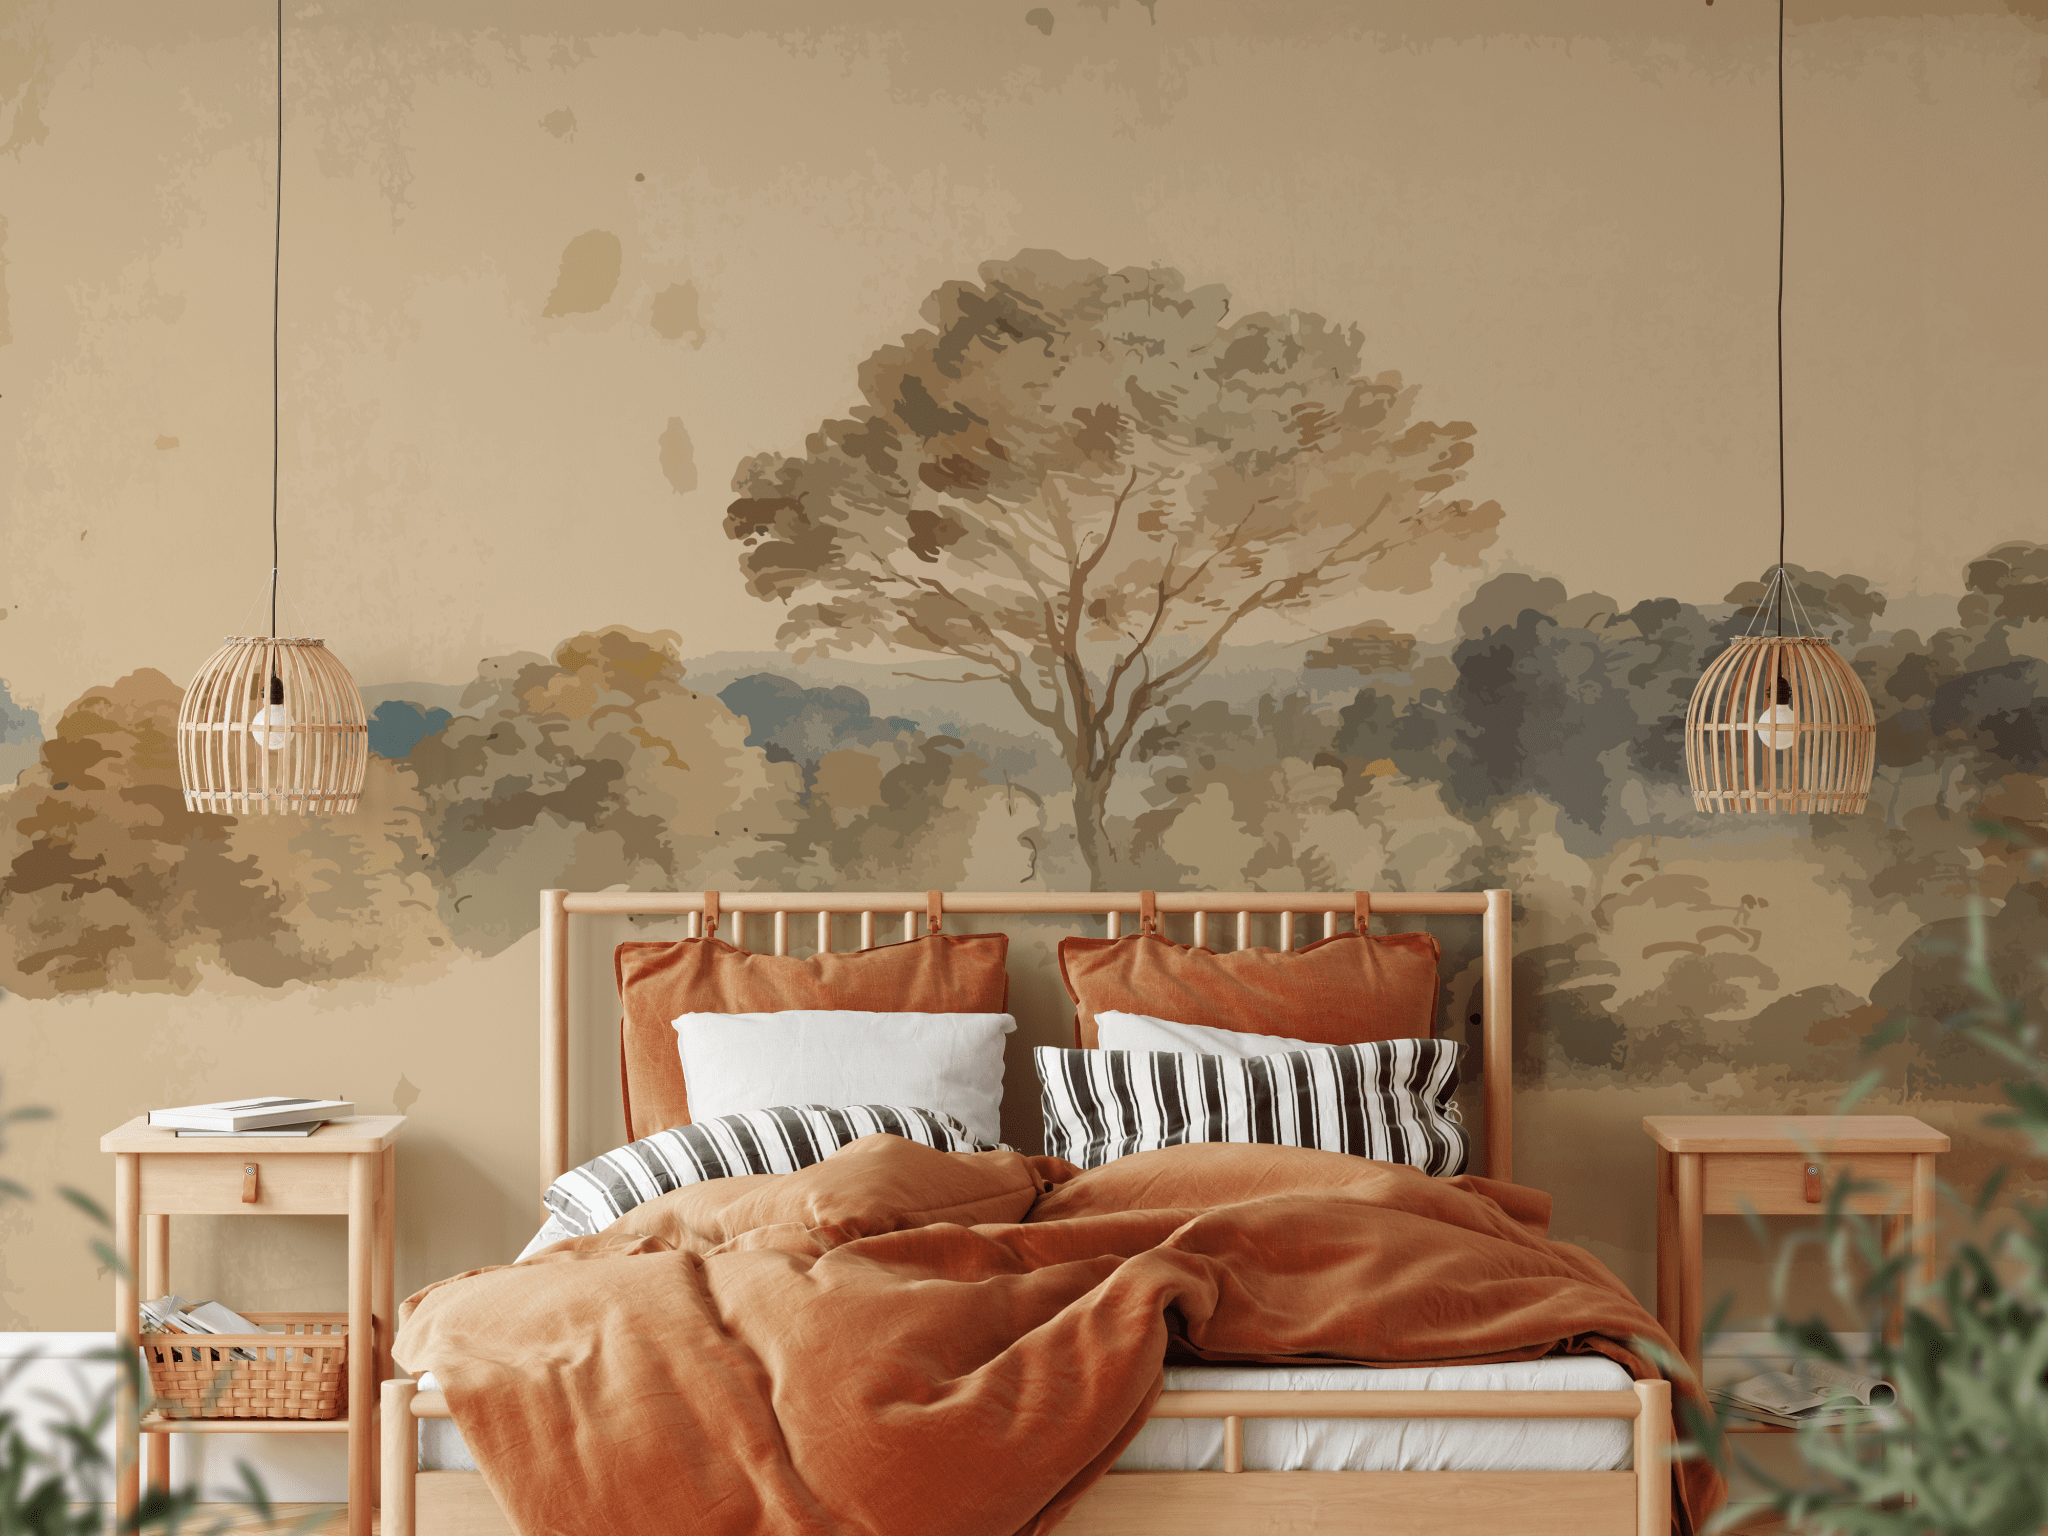 A warm and inviting bedroom with a wall adorned by a high-quality peel and stick mural illustrating a vintage landscape with trees. The room includes a wooden bed with orange bedding, striped pillows, and pendant lights.